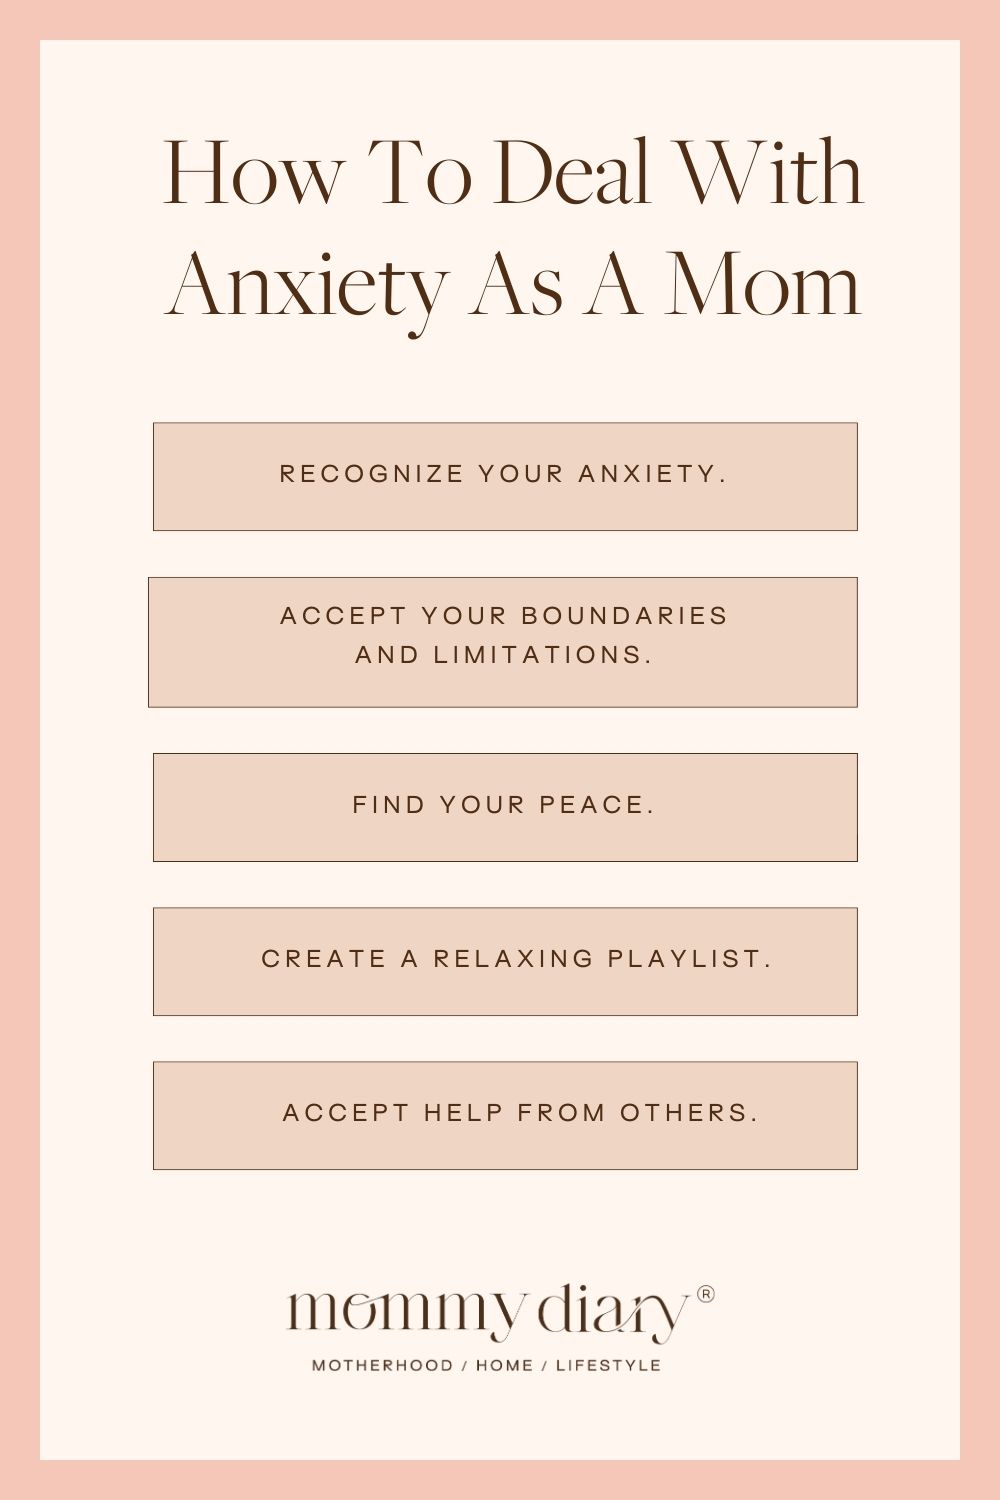 How To Deal With Anxiety As A Mom part 1